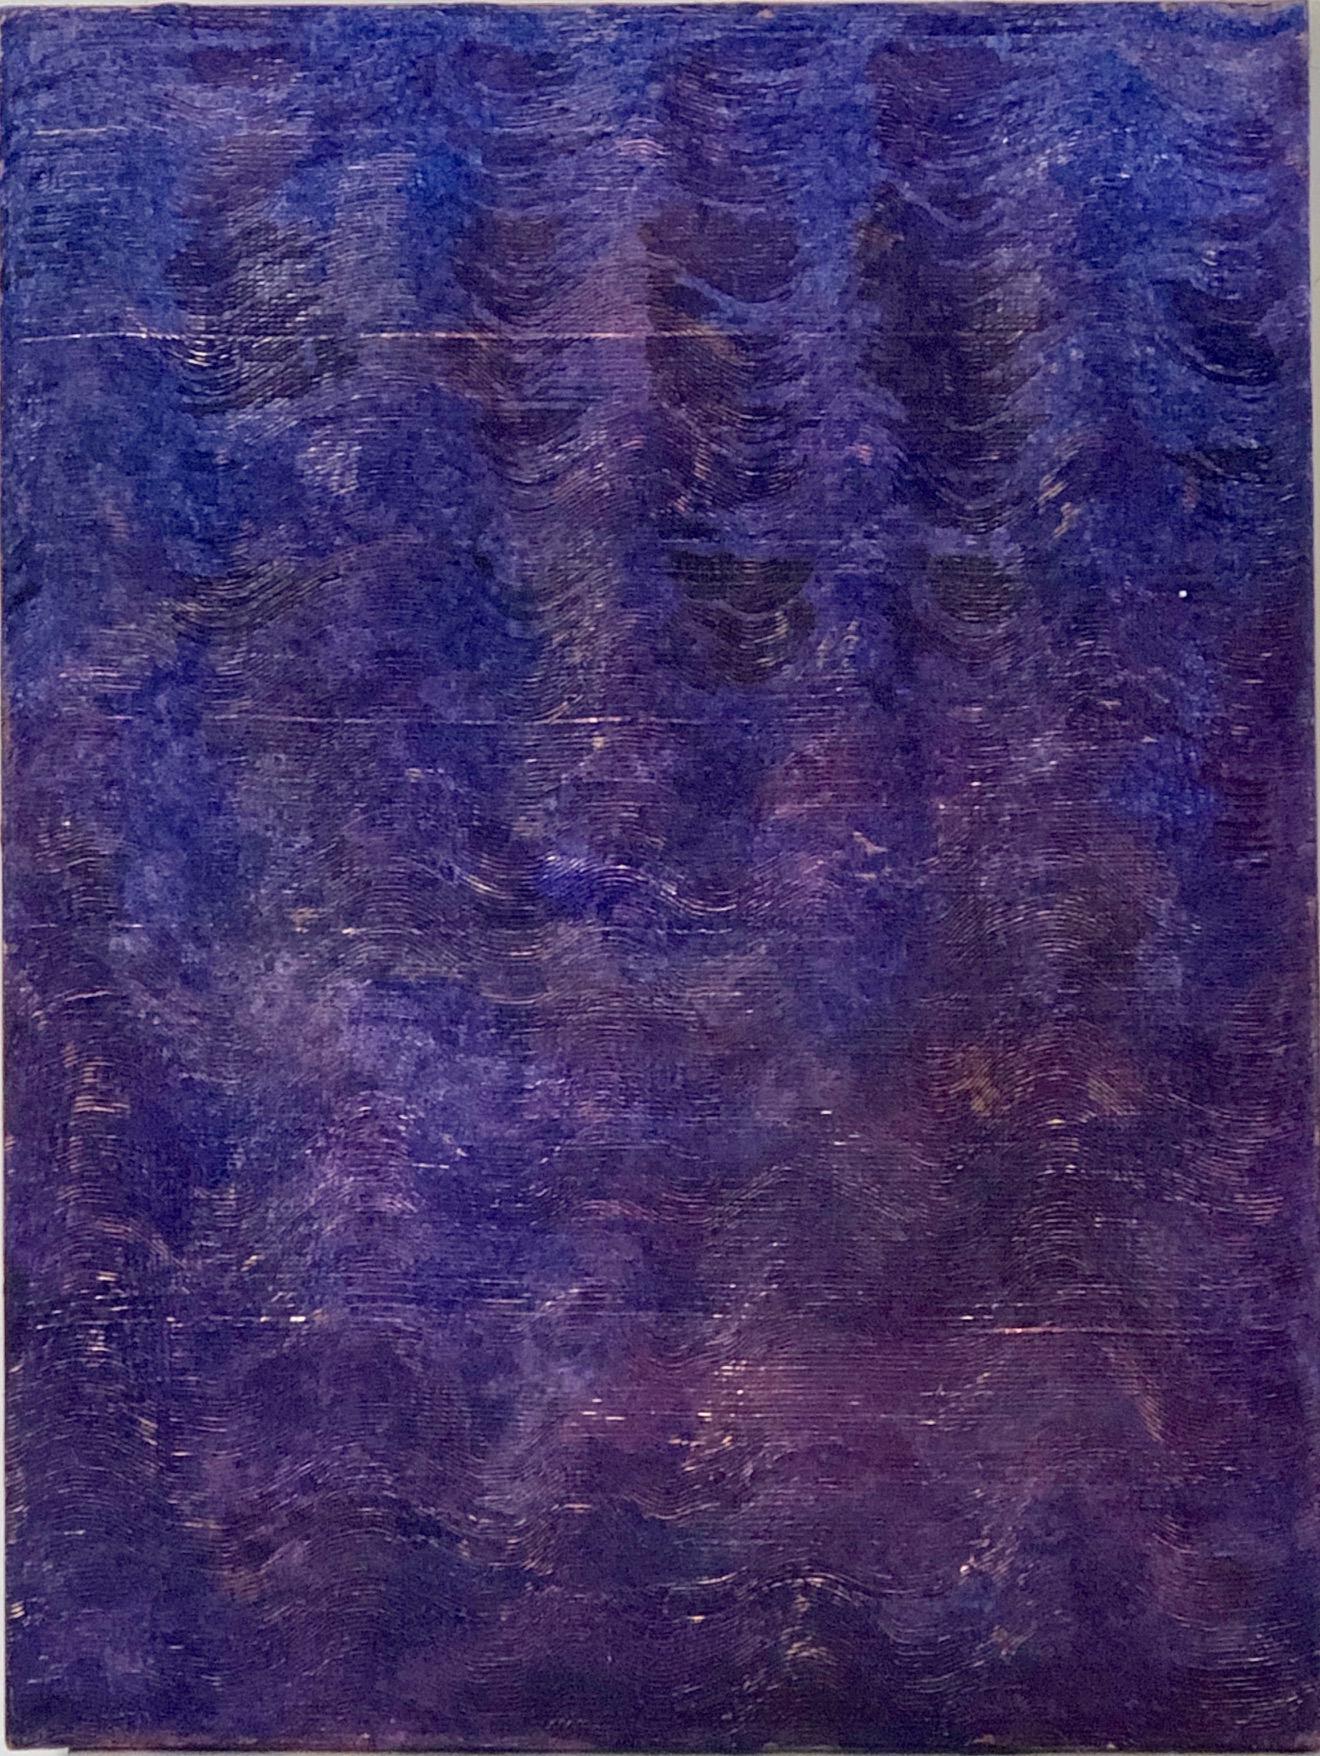 Augustus Cross Abstract Painting - "Untitled" Purple painting textured and comber in waves of color